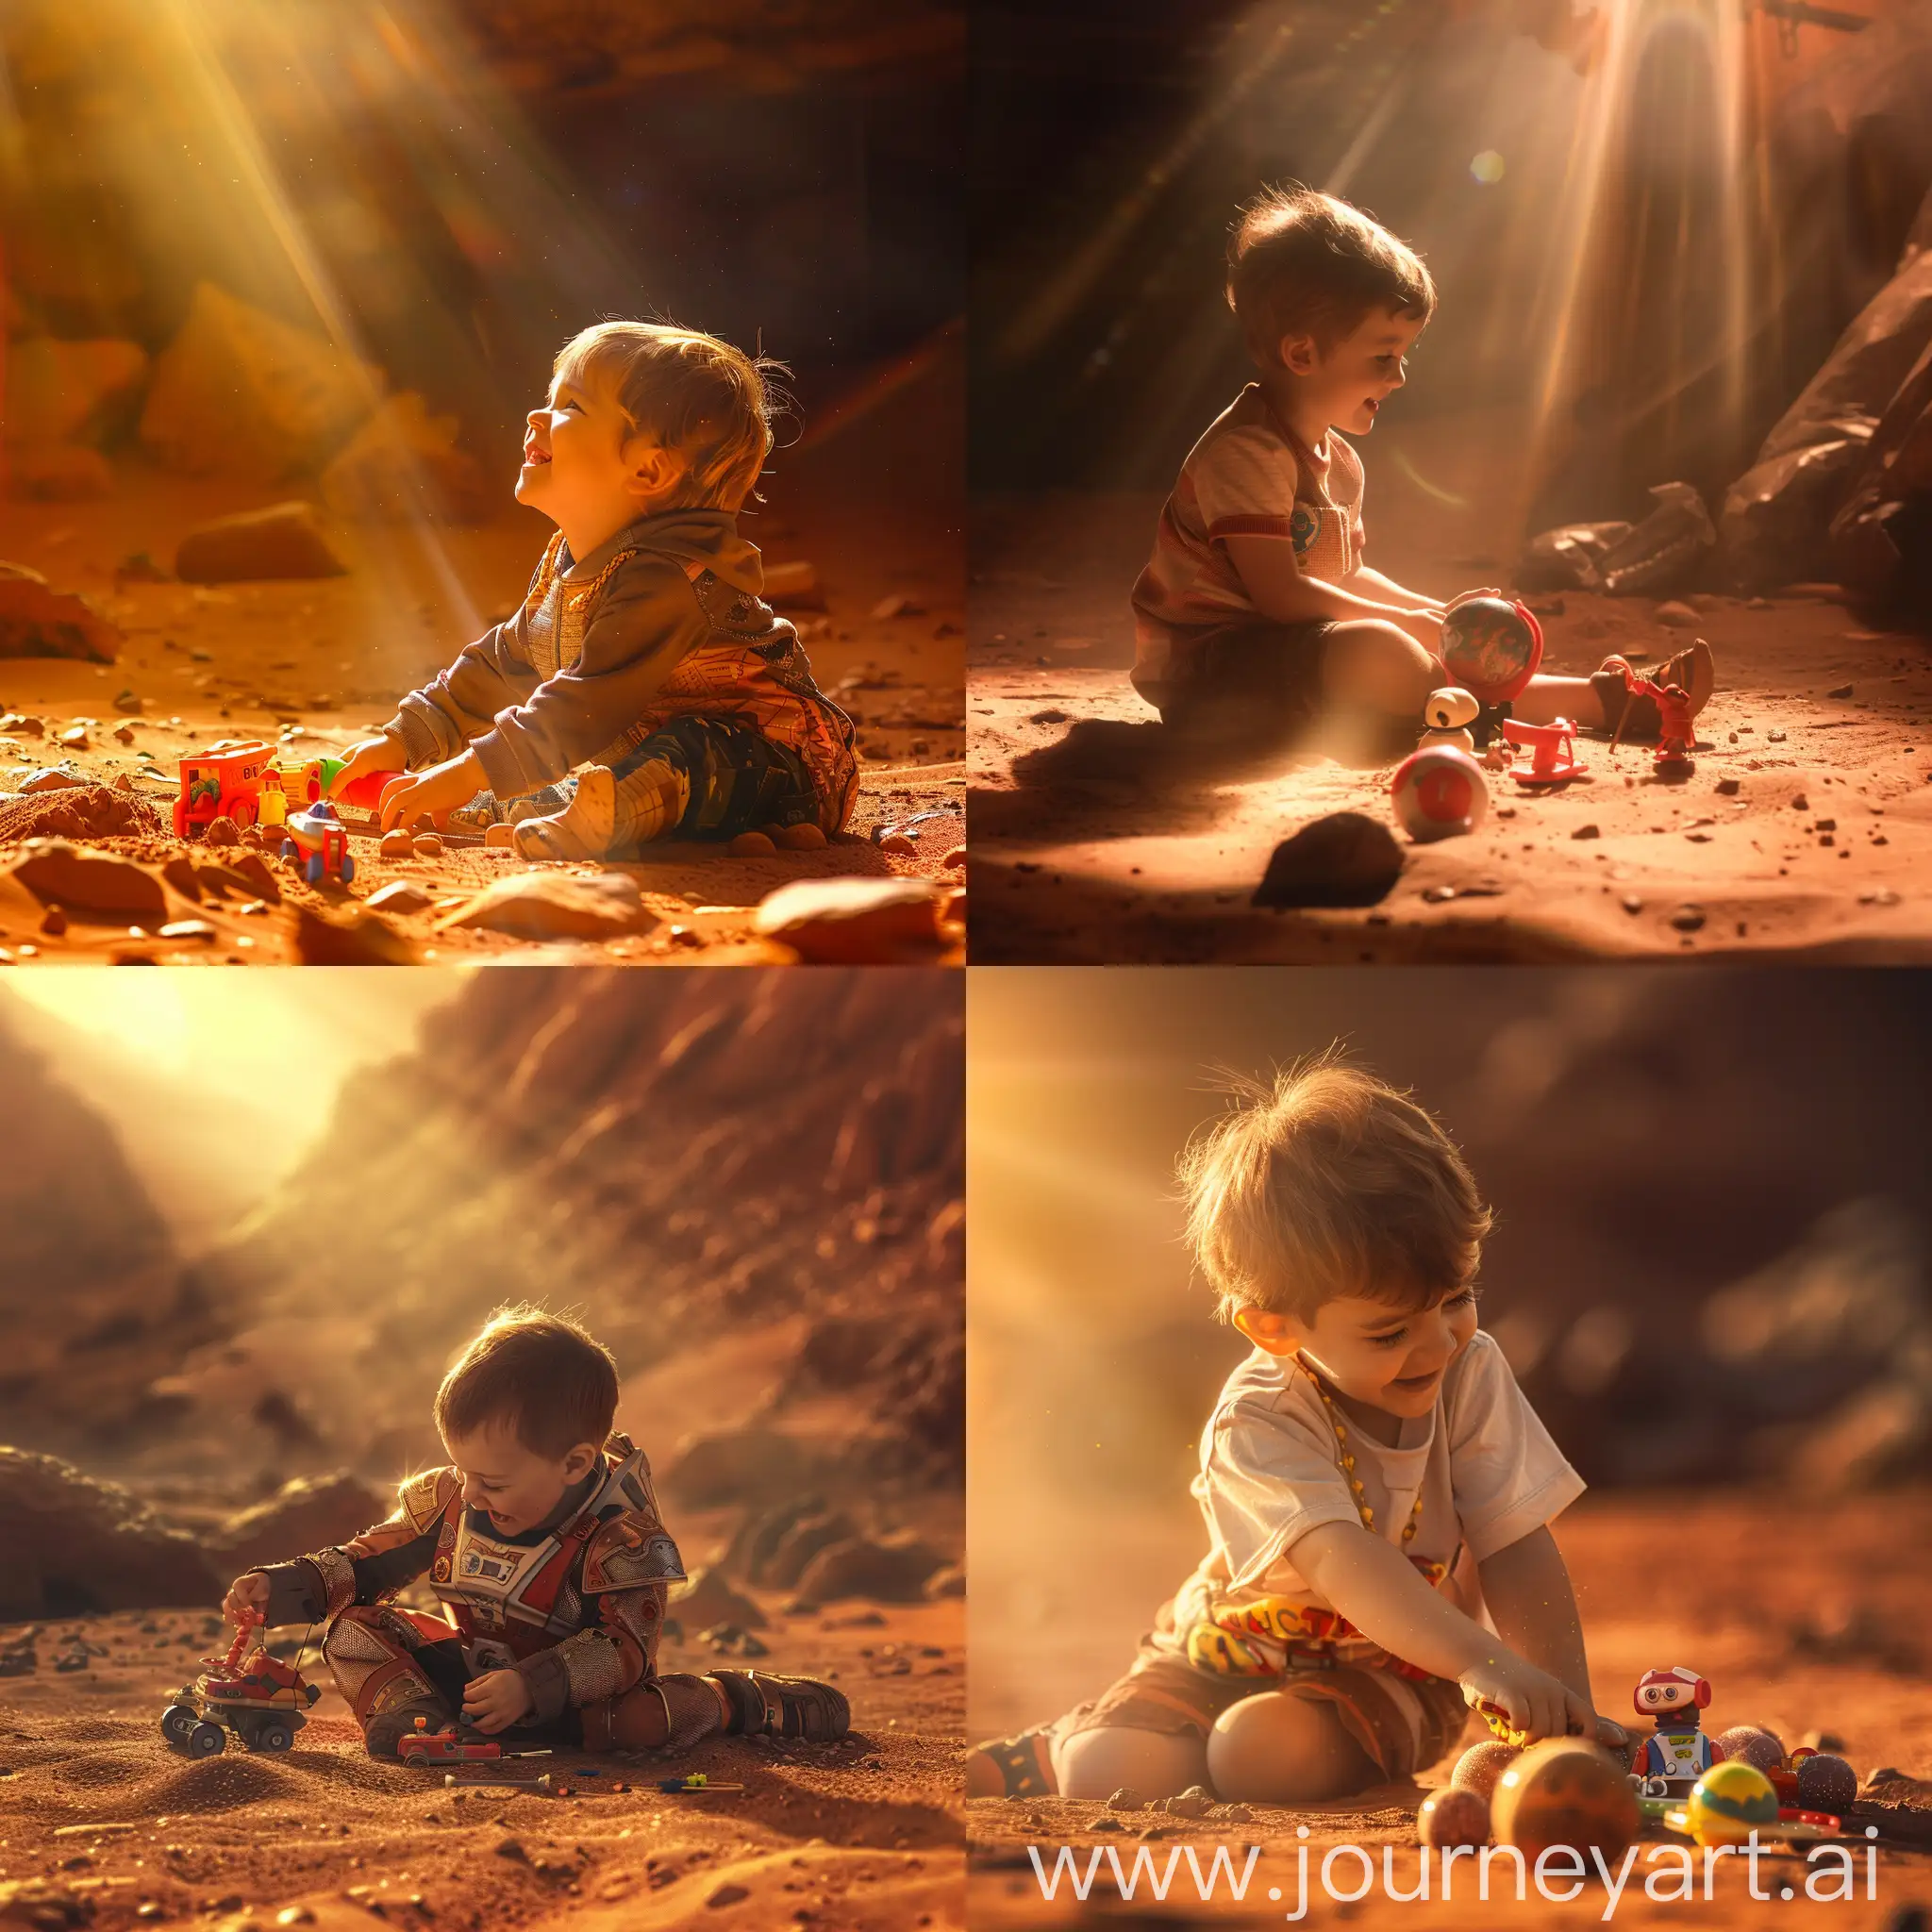 Joyful-Child-Playing-with-Toys-on-Mars-in-Sunlight